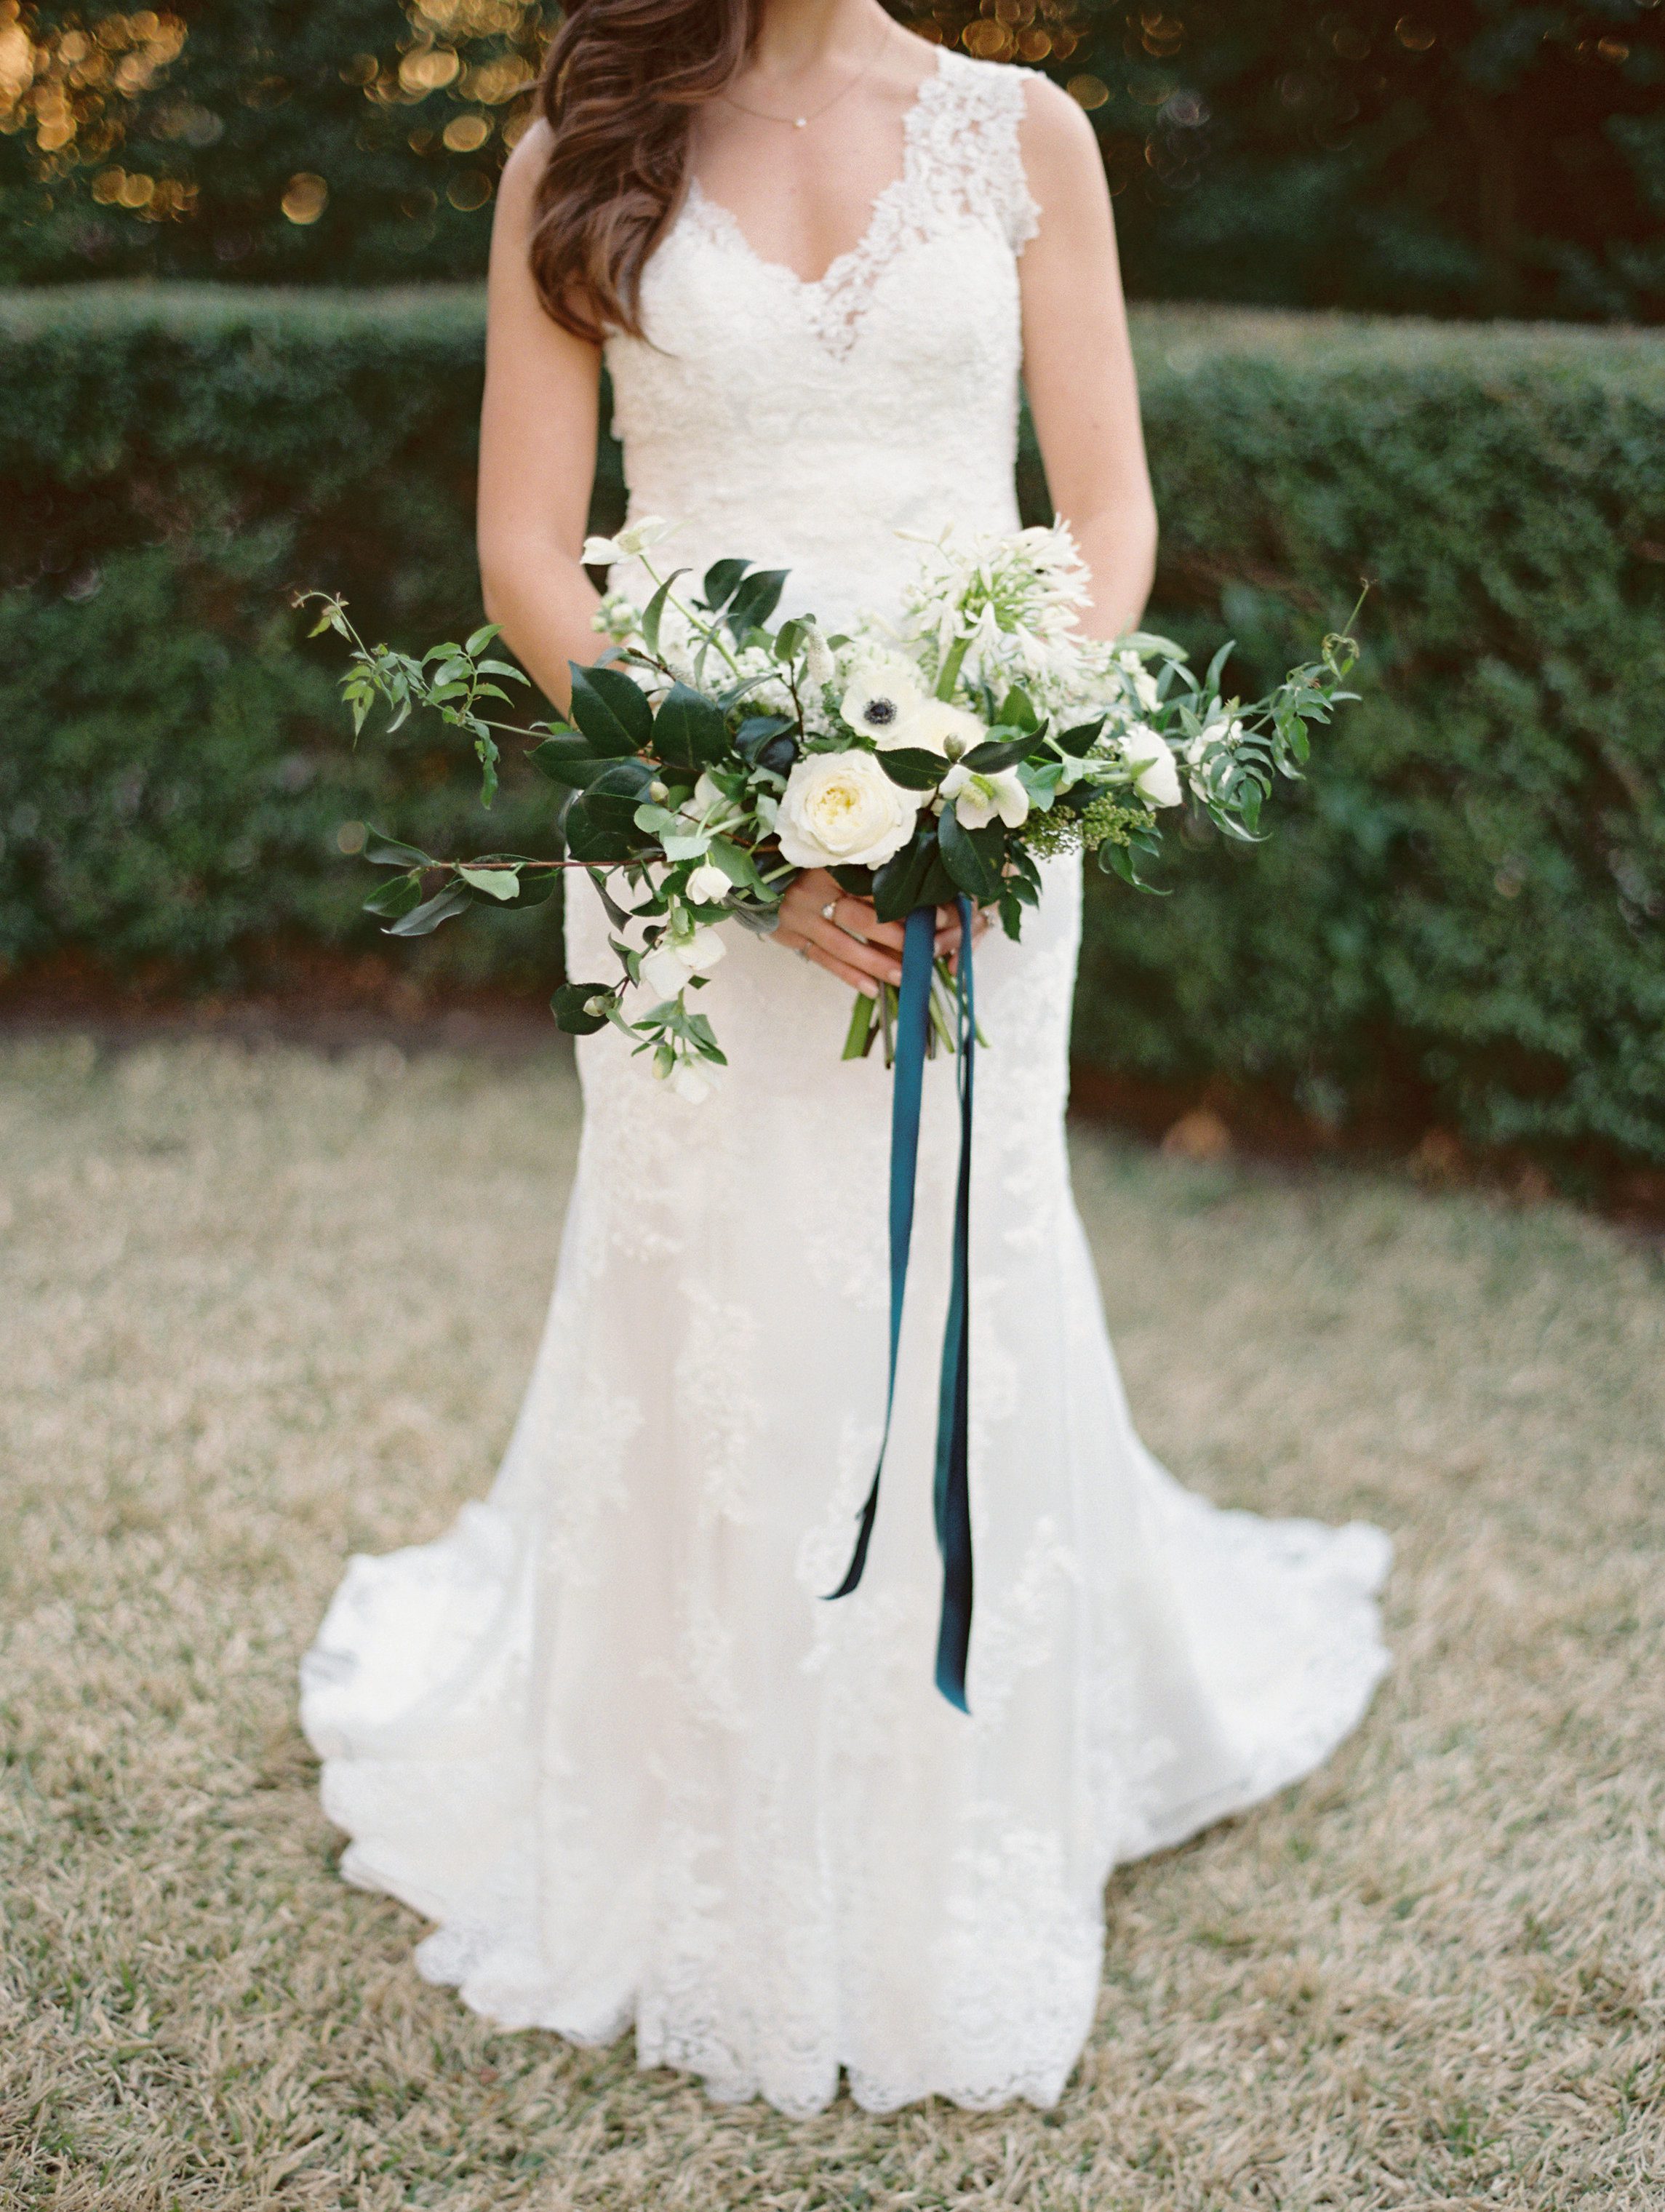 Bride is wearing Melanie by Maggie Sottero while carrying white blooms